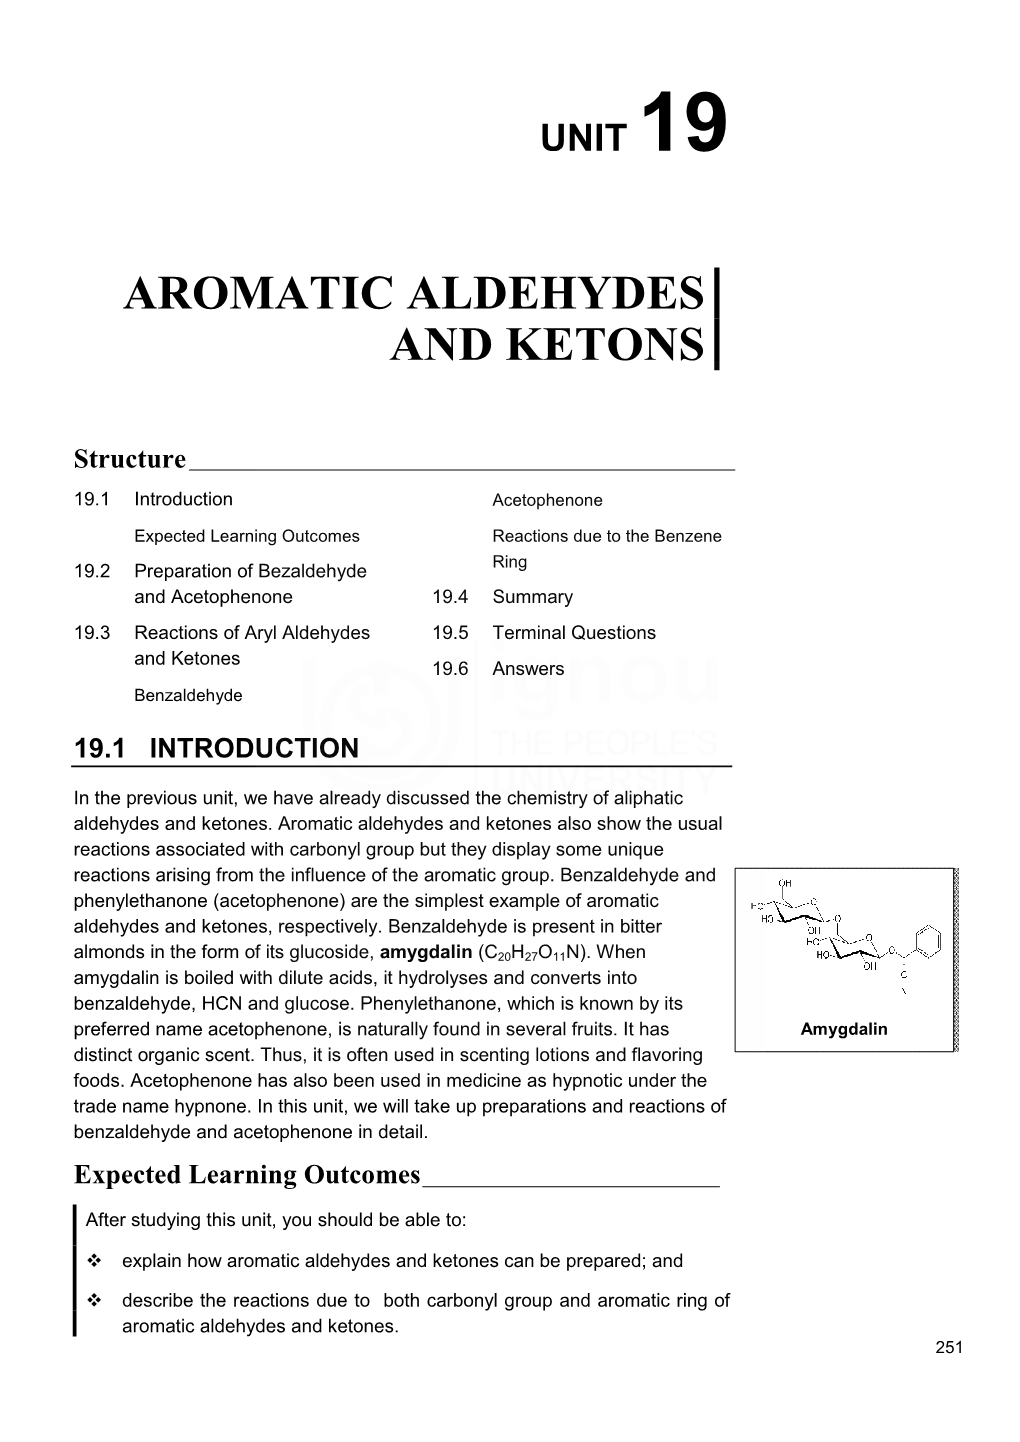 Aromatic Aldehydes and Ketons